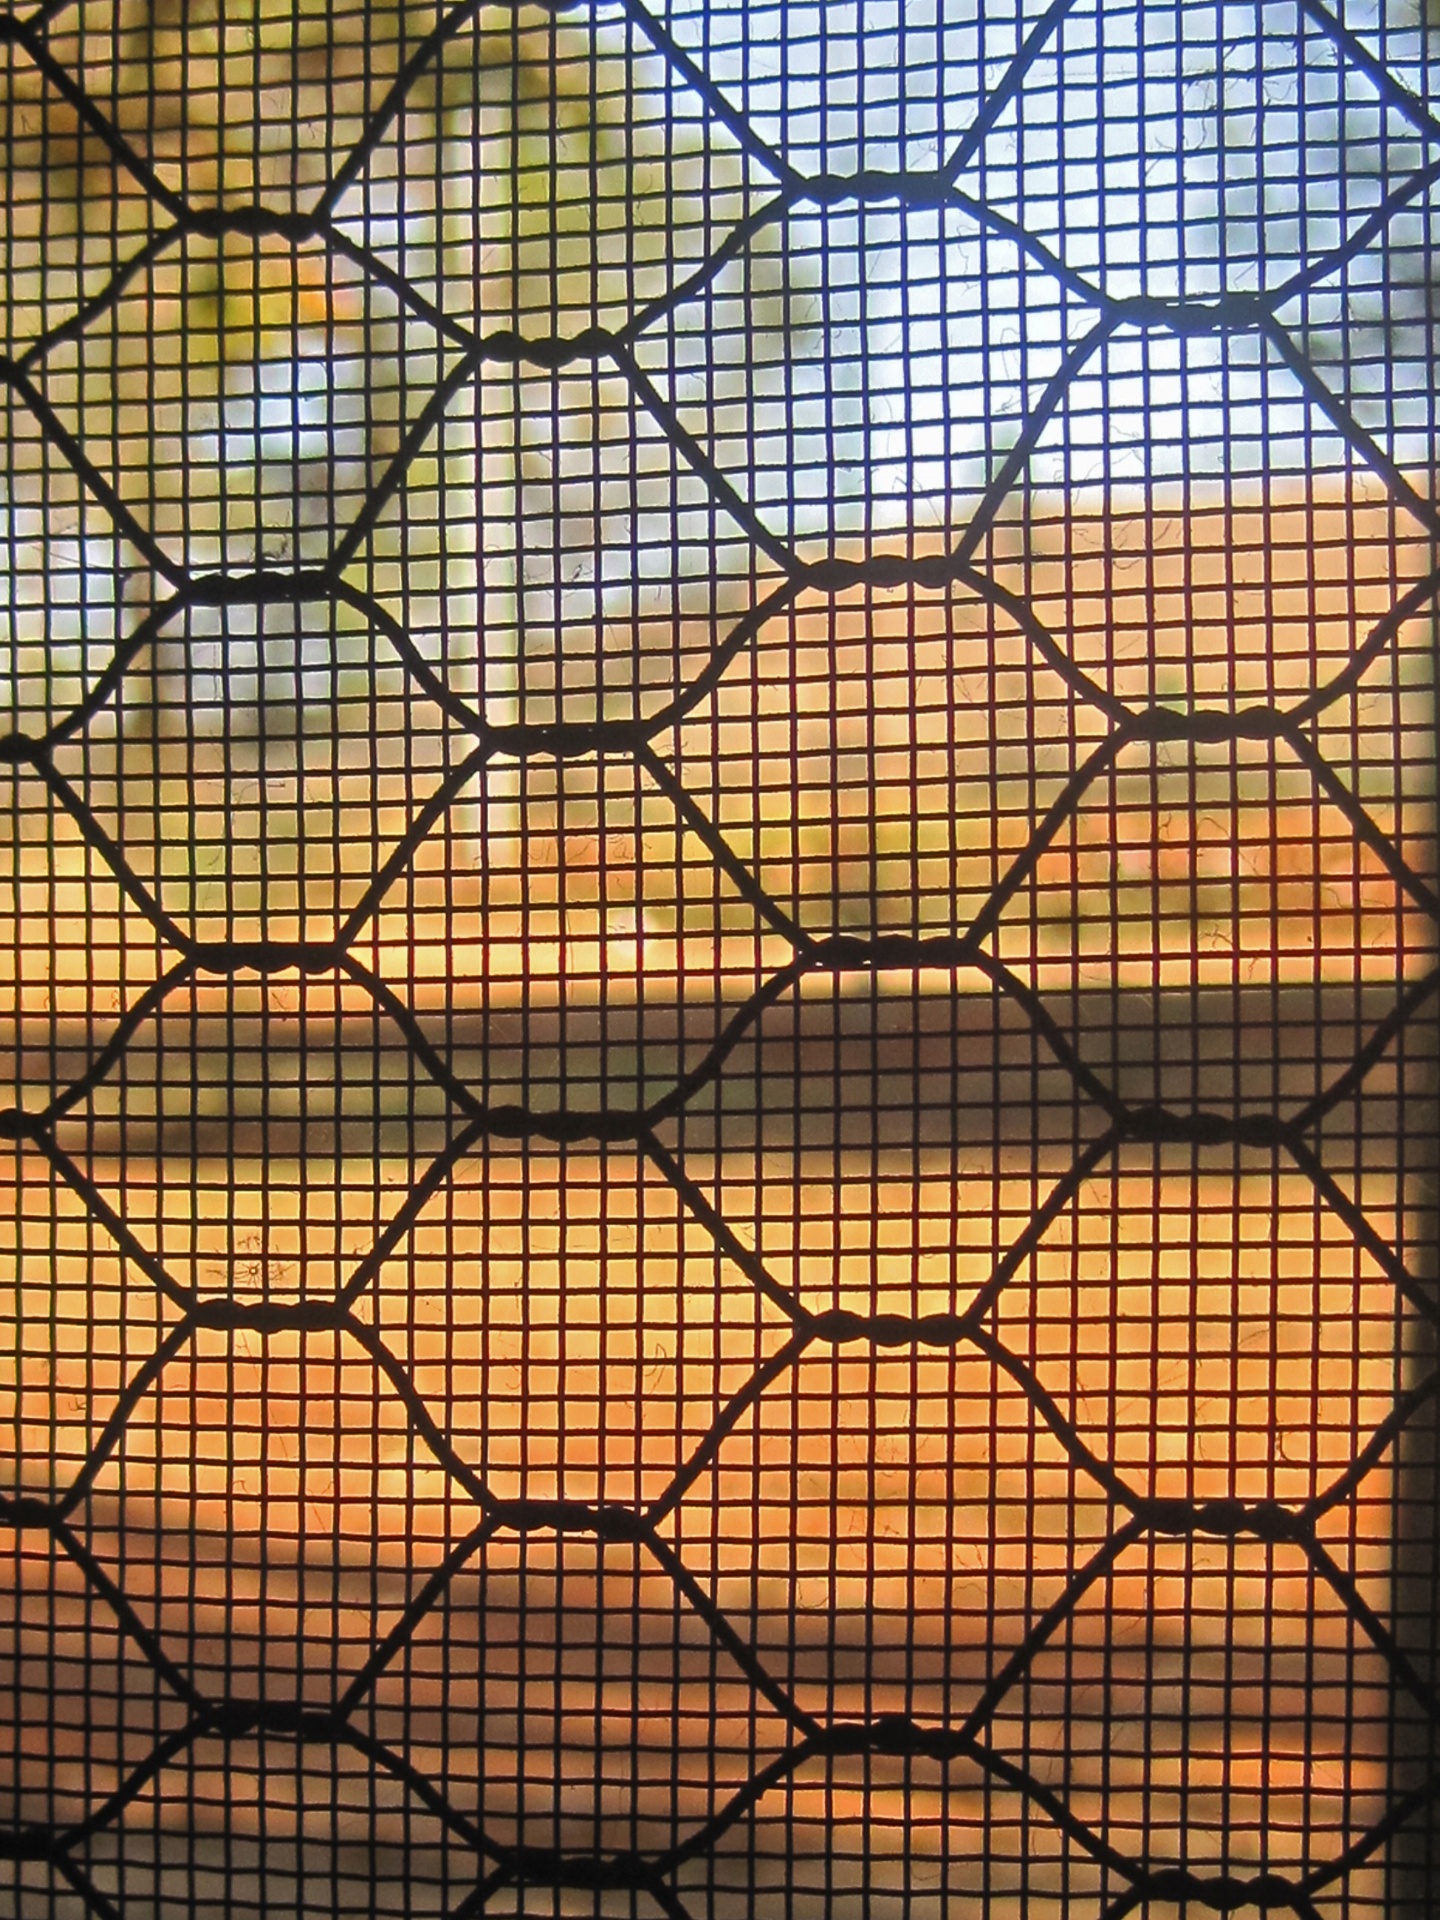 Fence And Grid